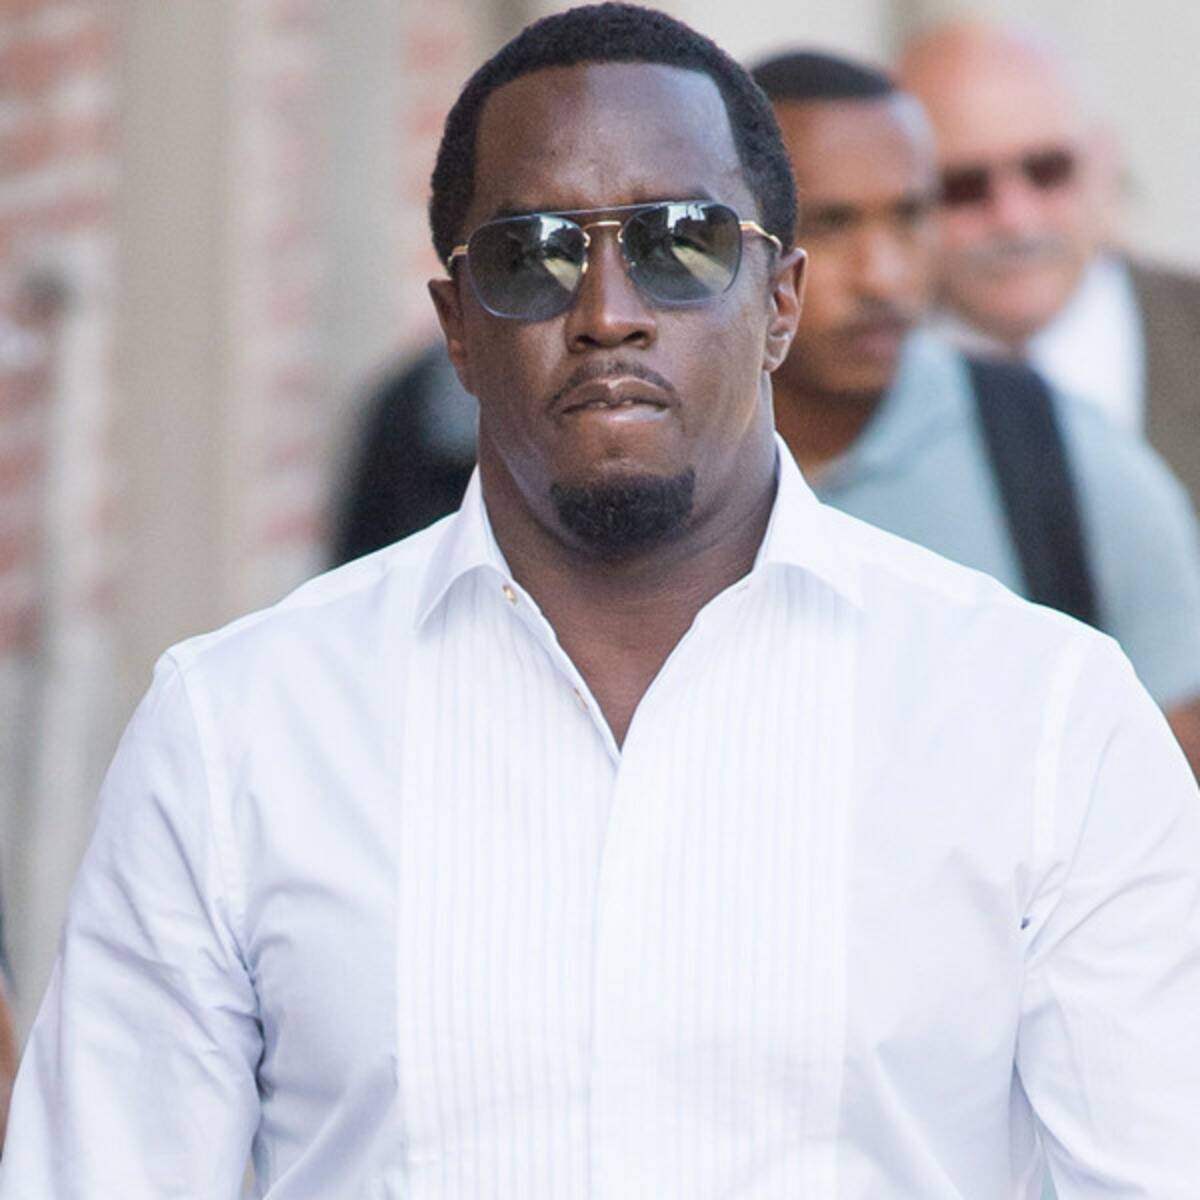 Diddy Launches A News Platform - See His Message To Fans